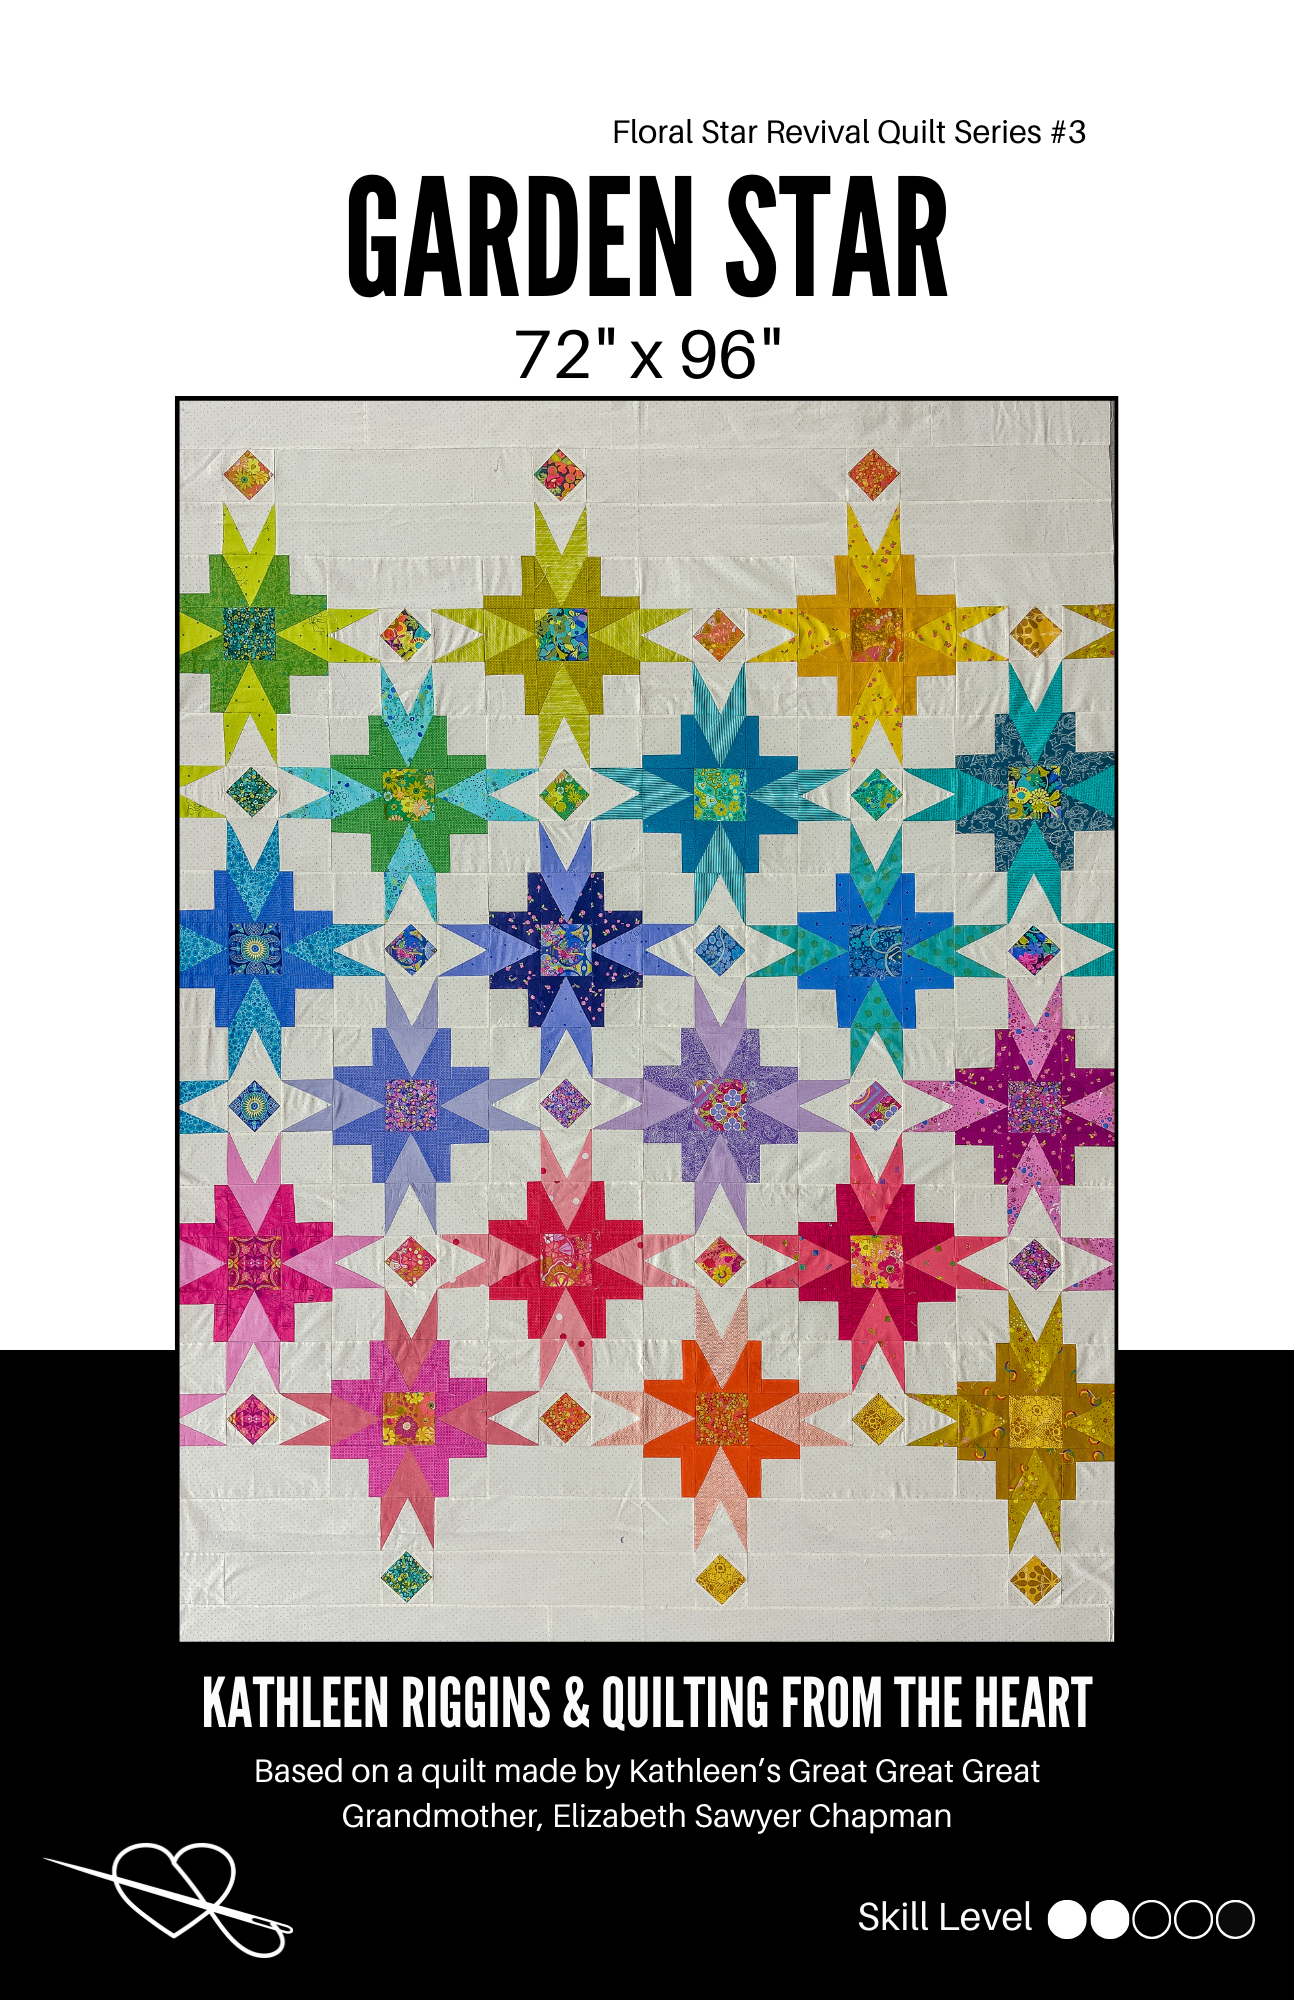 Floral Star Revival Quilt Series -- All Four Patterns -- PDF Copies